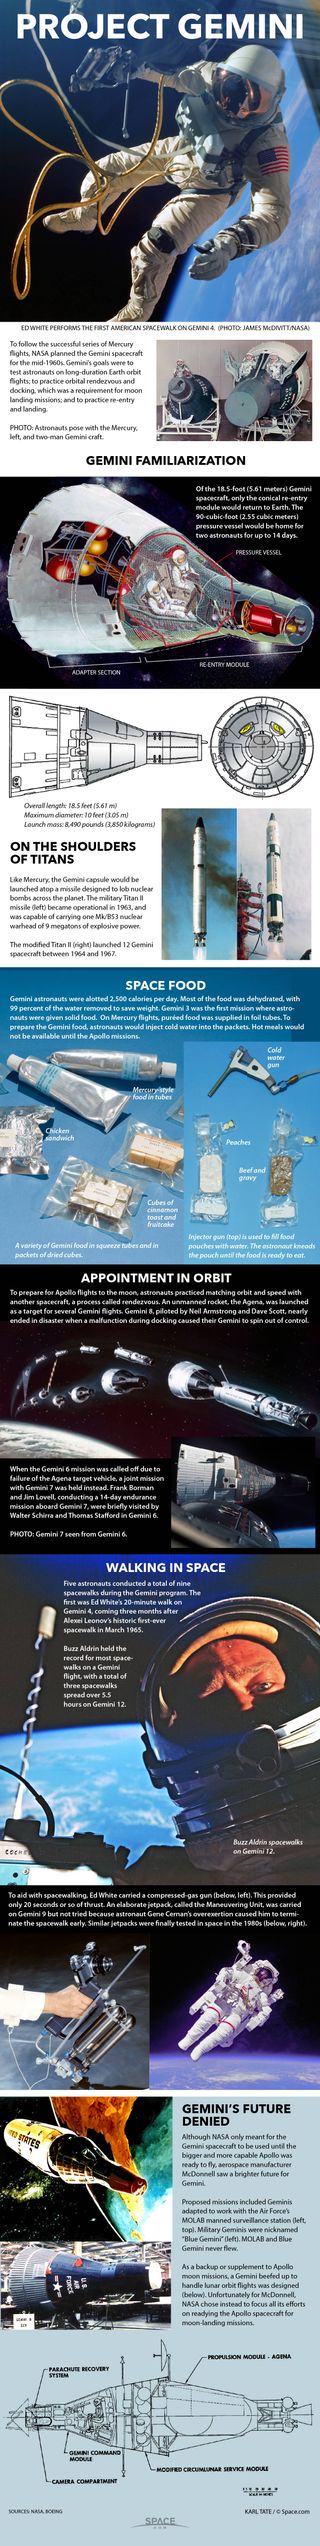 Paving the way for Apollo's missions to the moon, the Gemini program provided much-needed experience for astronauts in space. See how NASA's Gemini spacecraft worked in our full infographic.